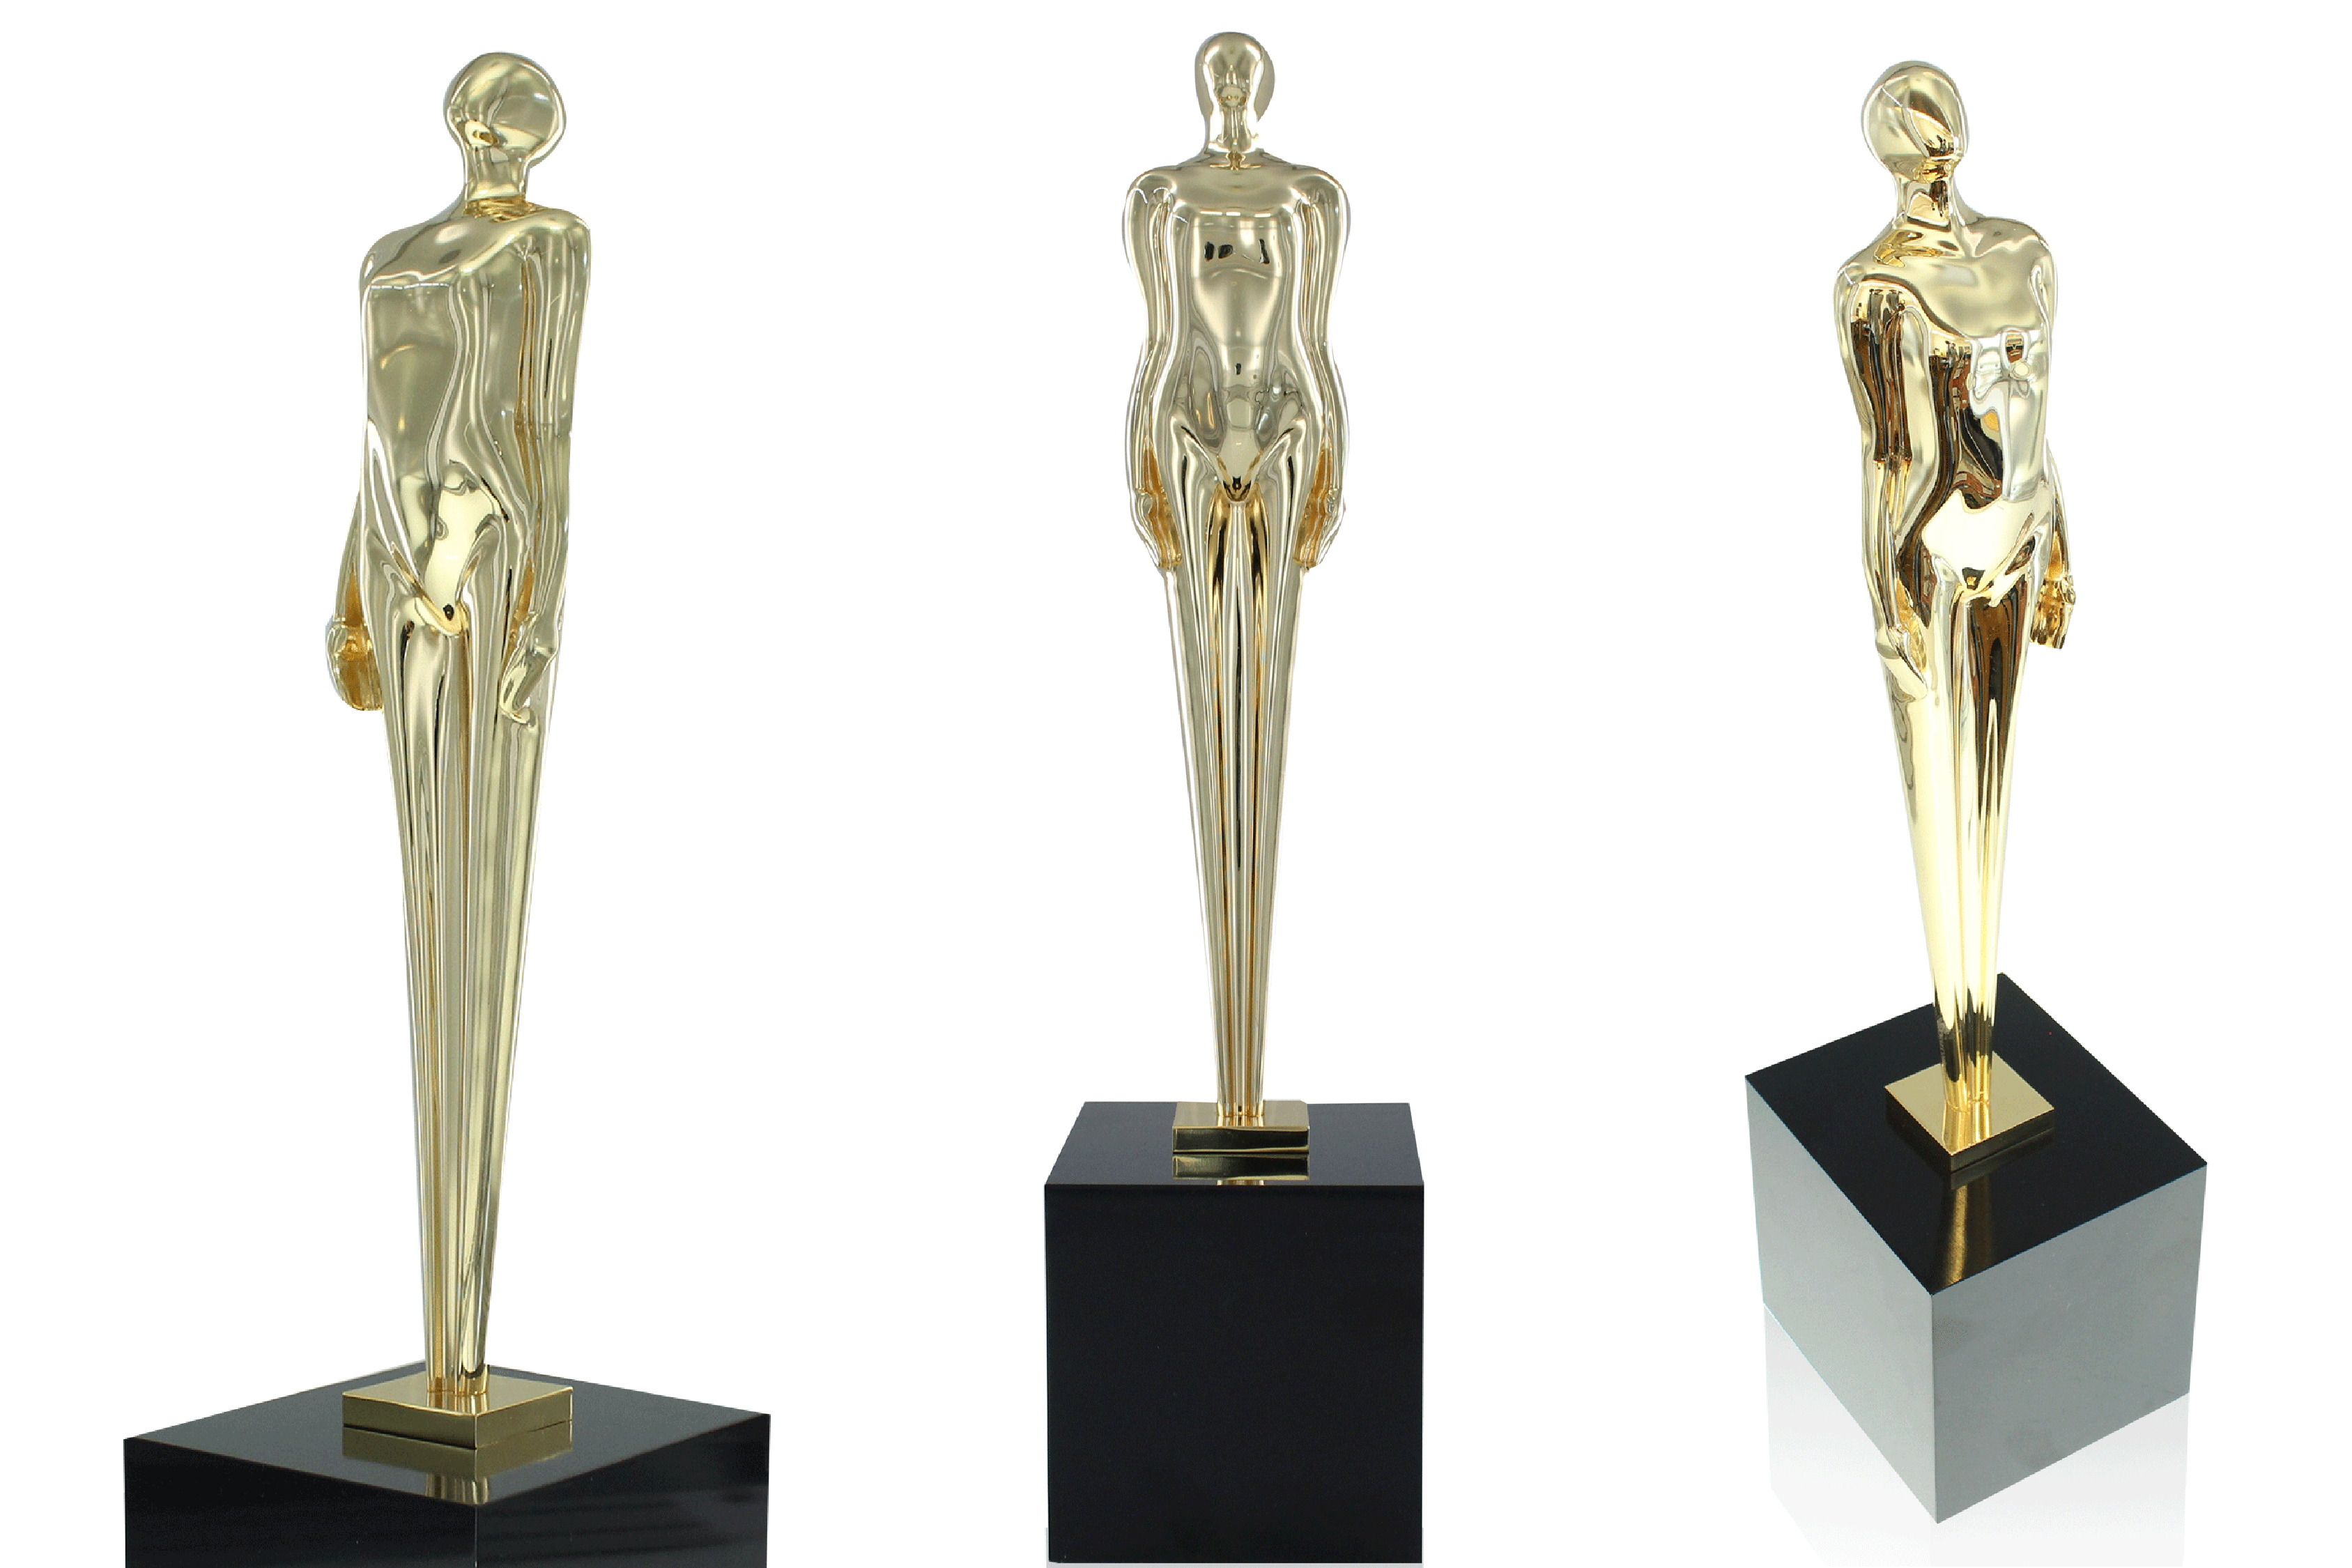 3 views of the limited edition Figure 1 trophy